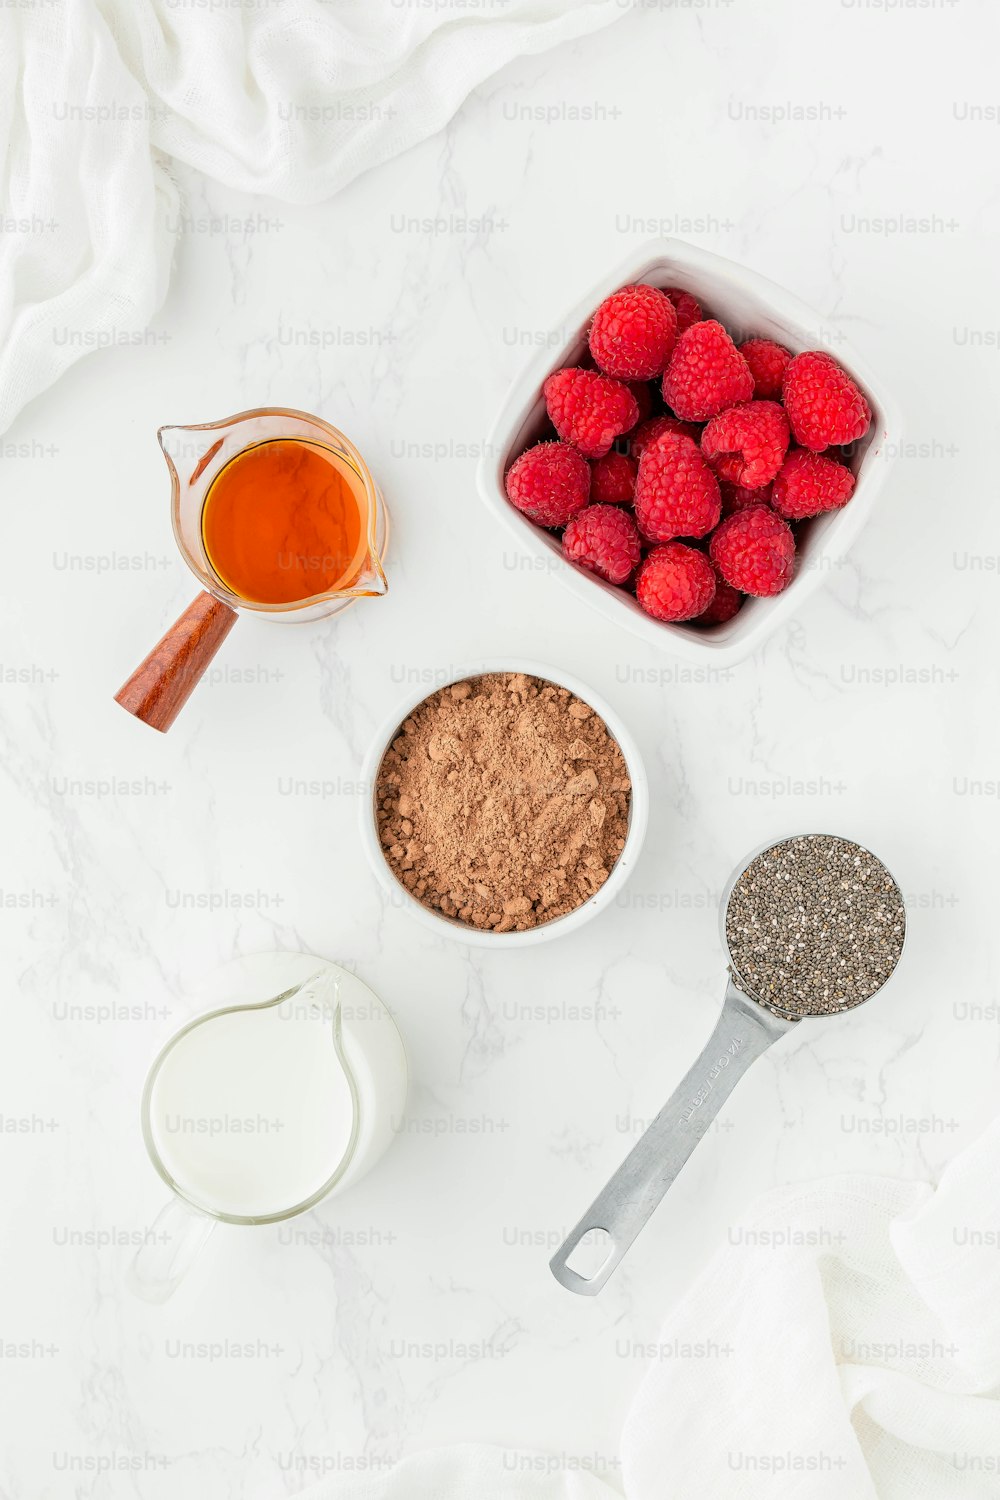 raspberries, milk, and other ingredients on a white surface